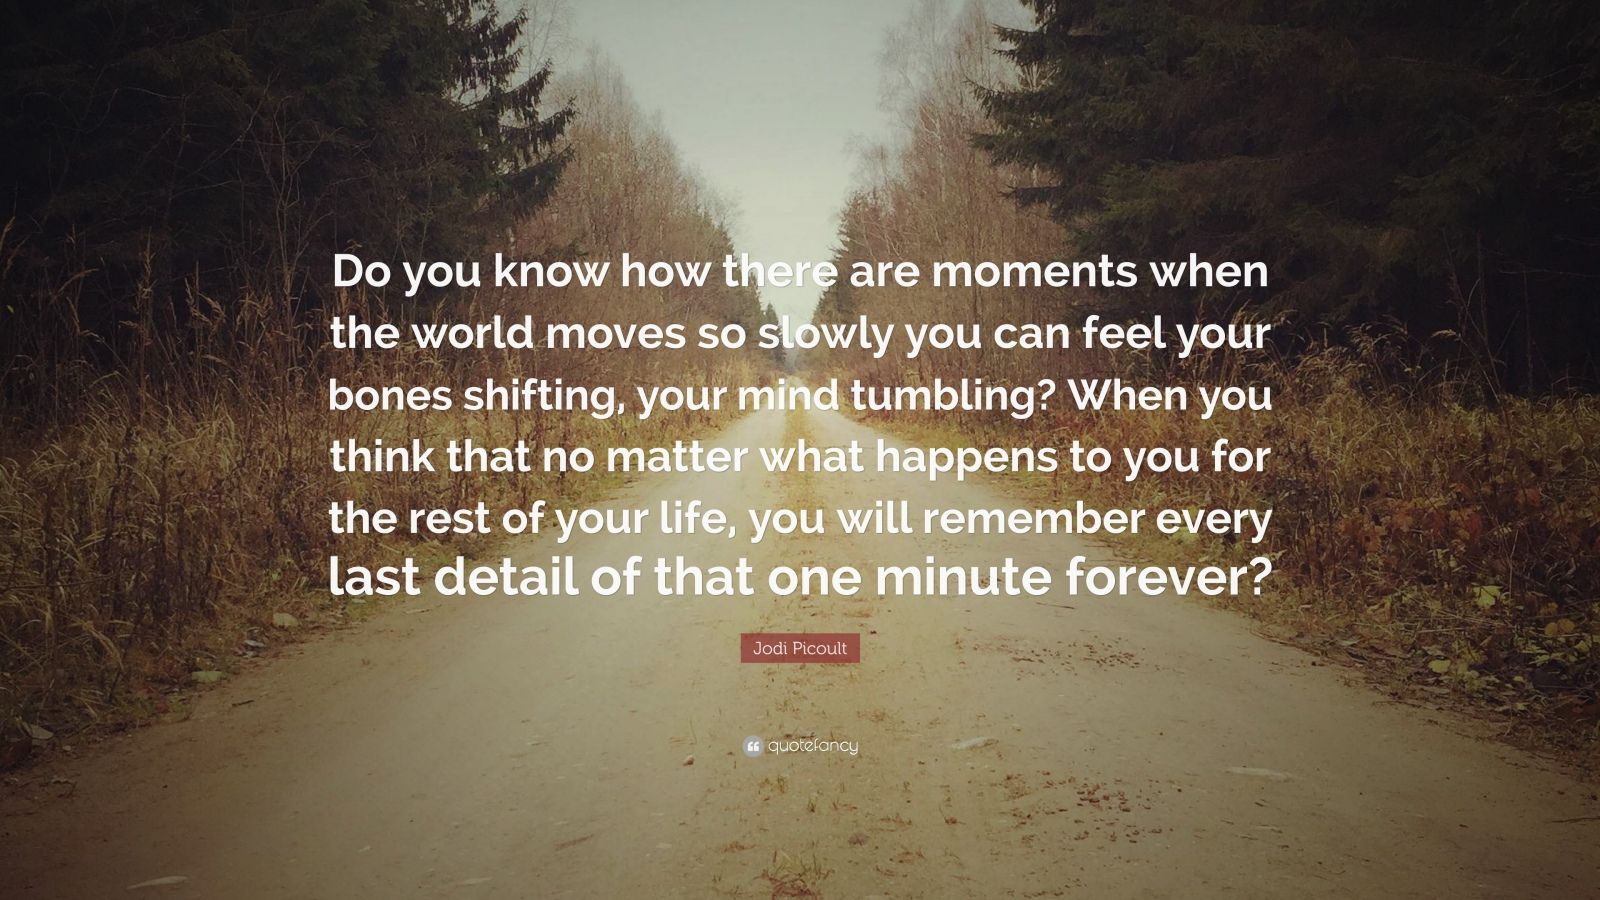 Jodi Picoult Quote: “Do you know how there are moments when the world ...